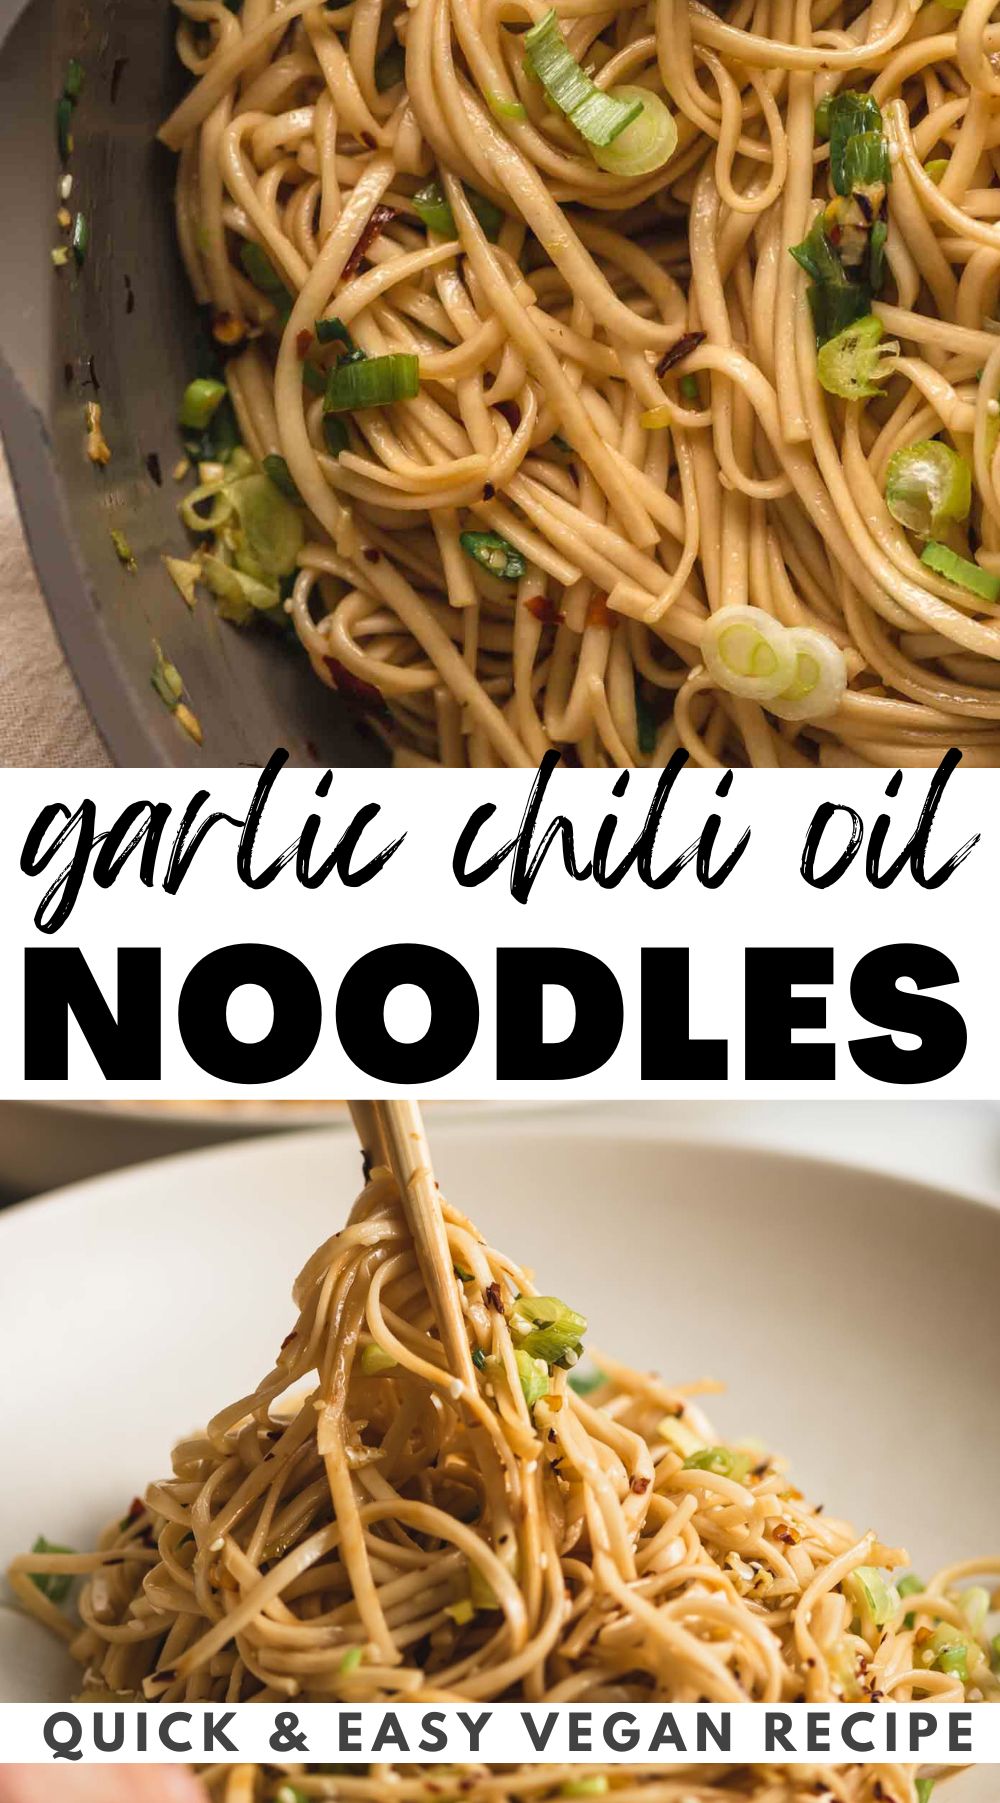 A graphic for a garlic chili oil noodles with two images of the recipe and a text title.